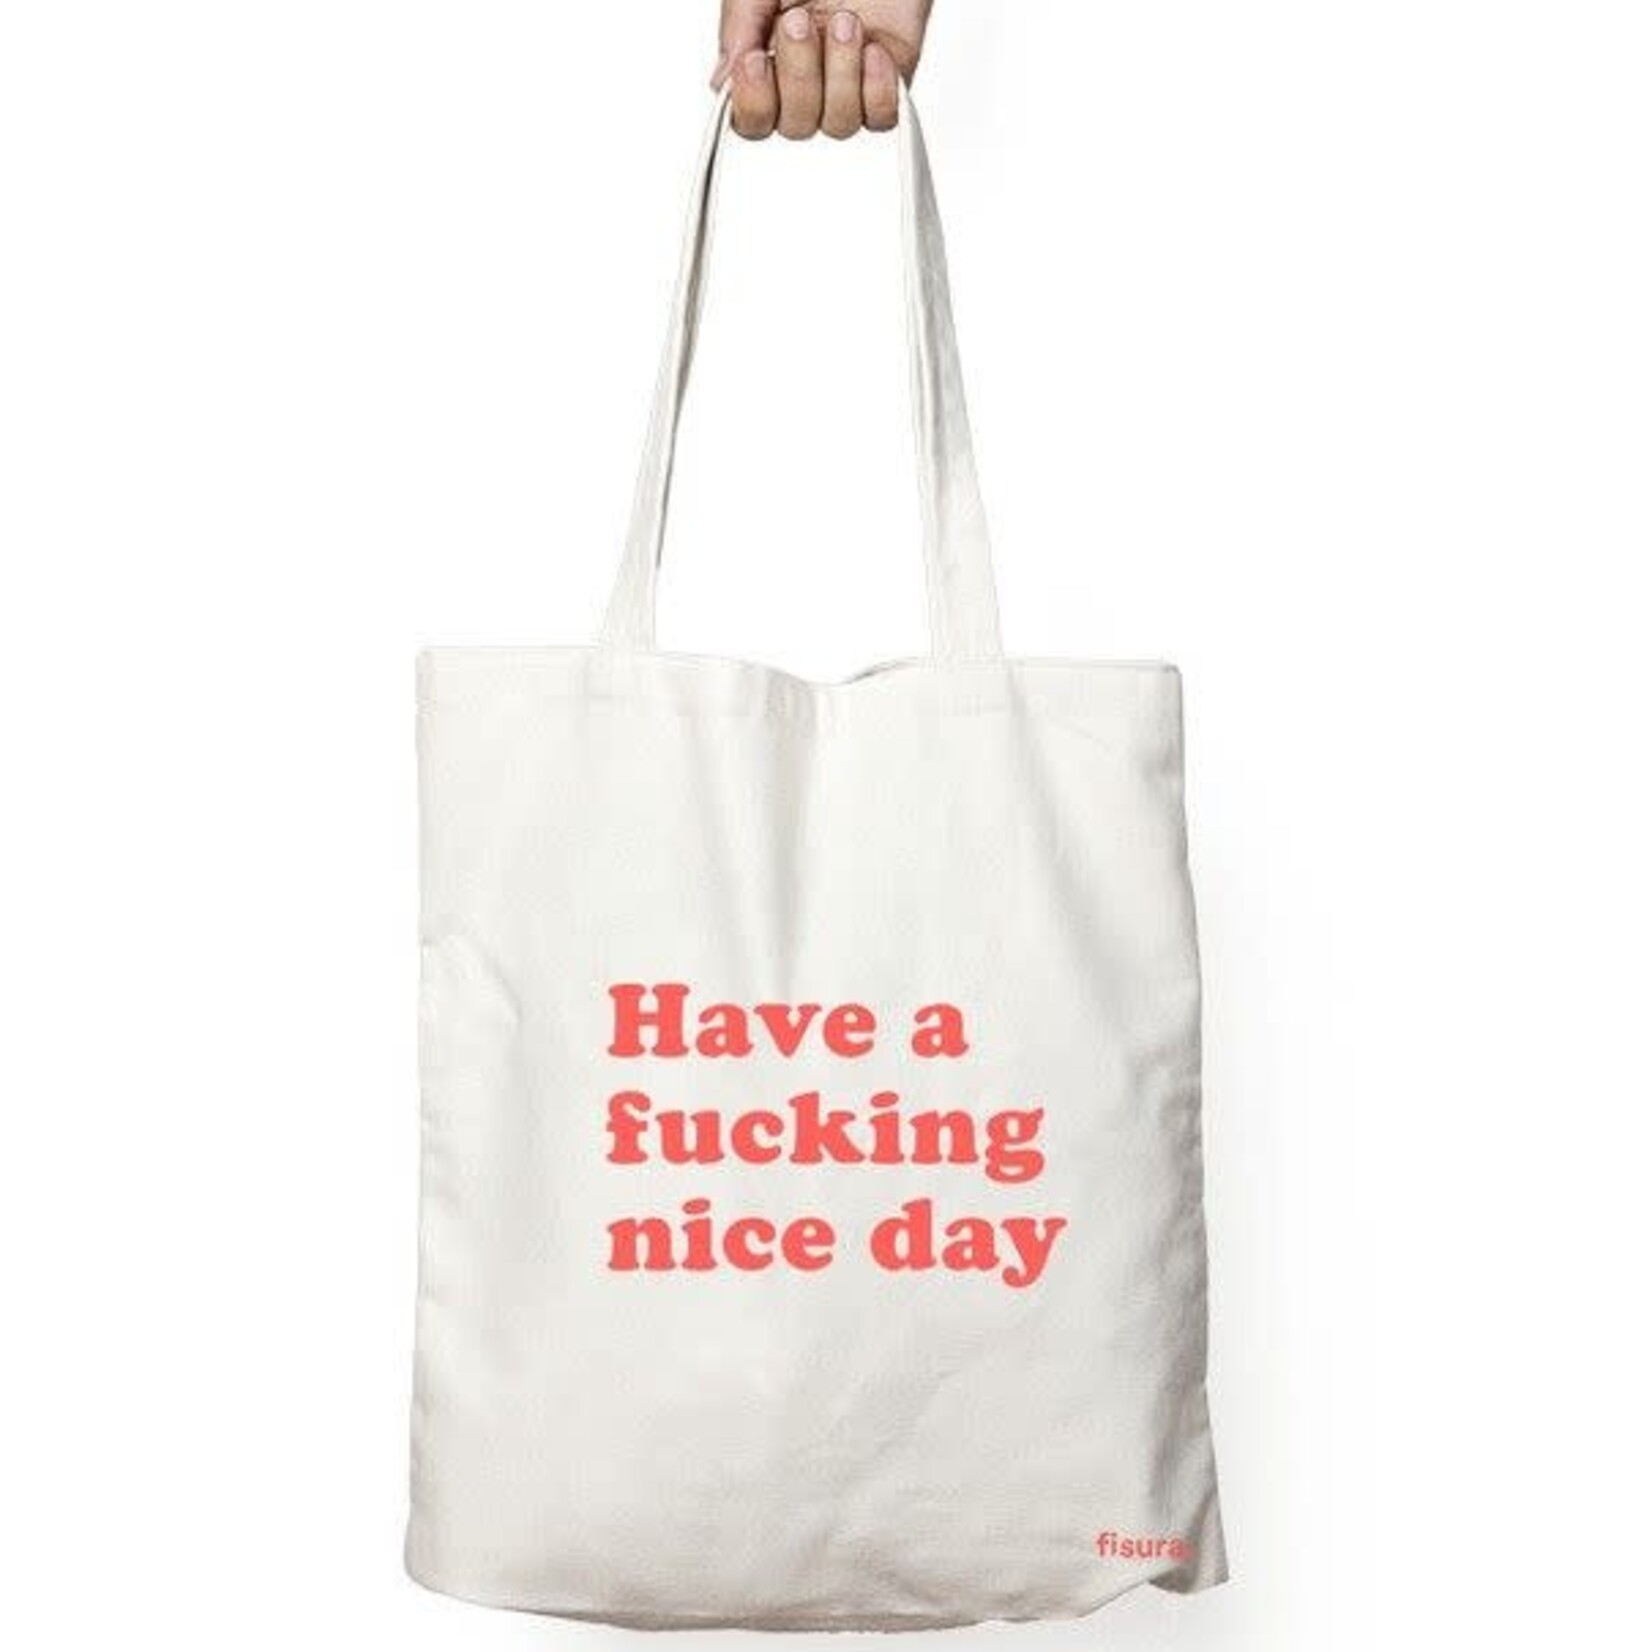 Have a Fucking Nice Day- Tote bag